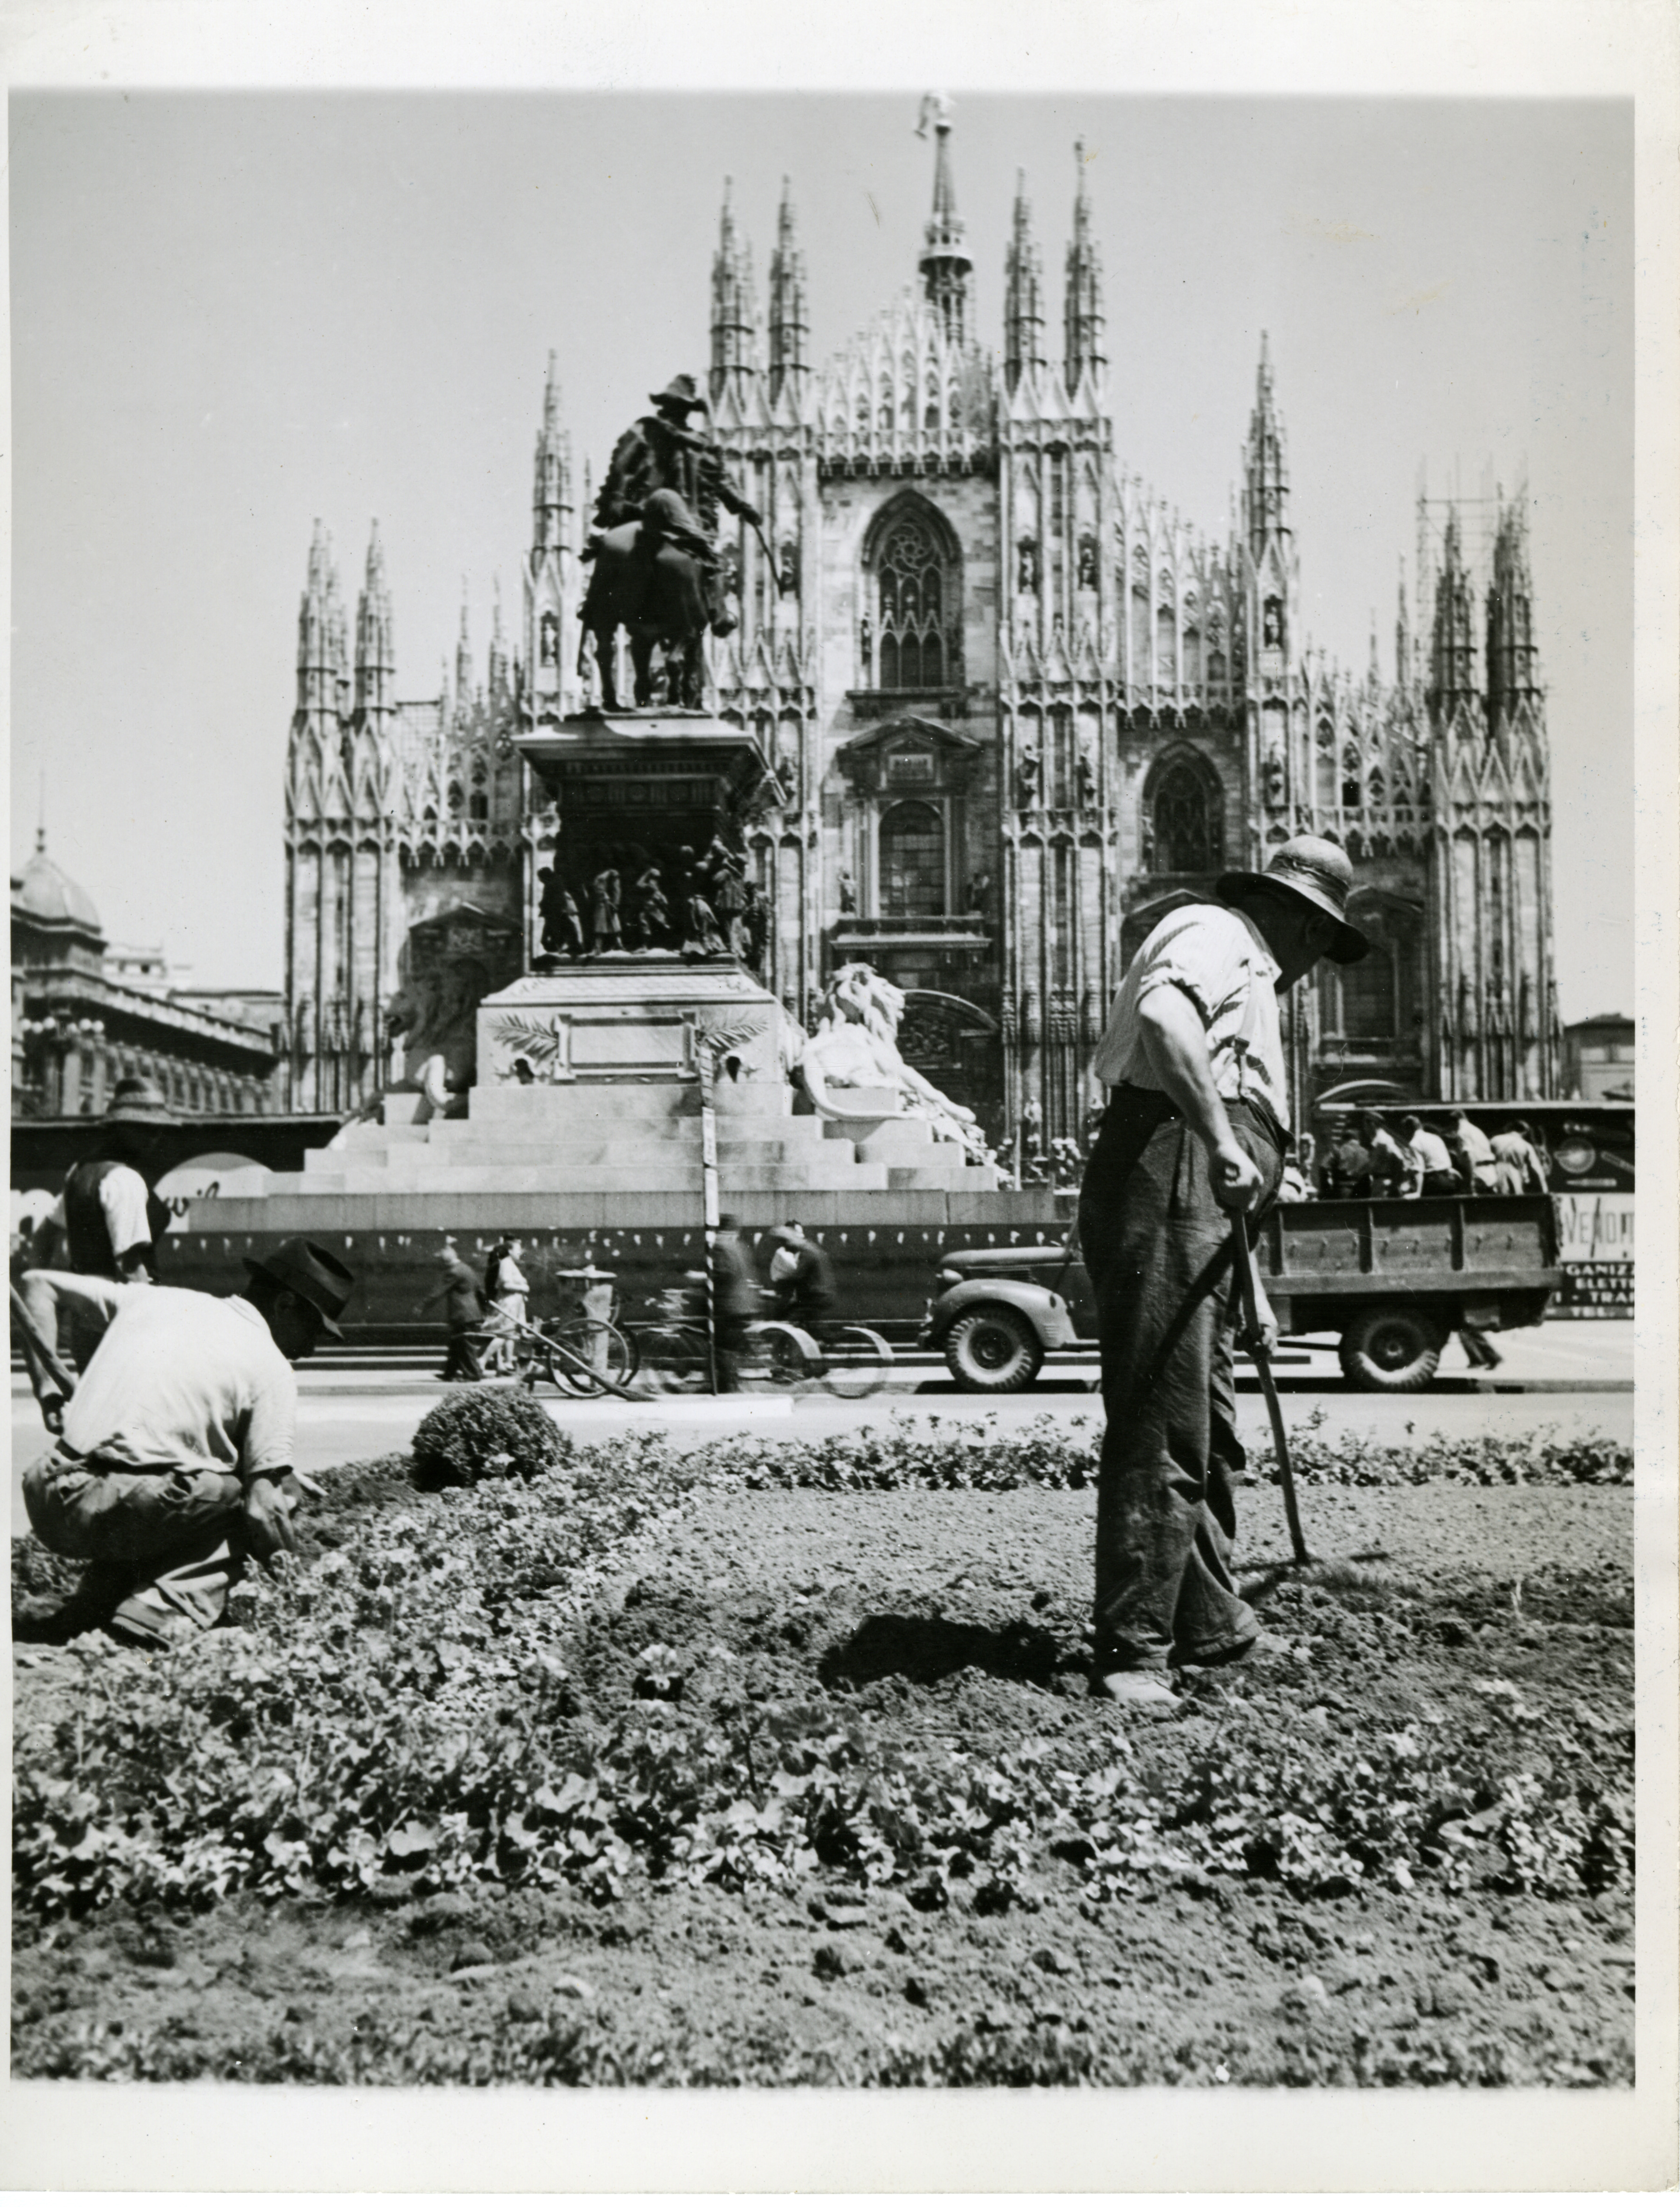 Gardeners working on a plot of flowers in the Piazza Duomo, Milan ...